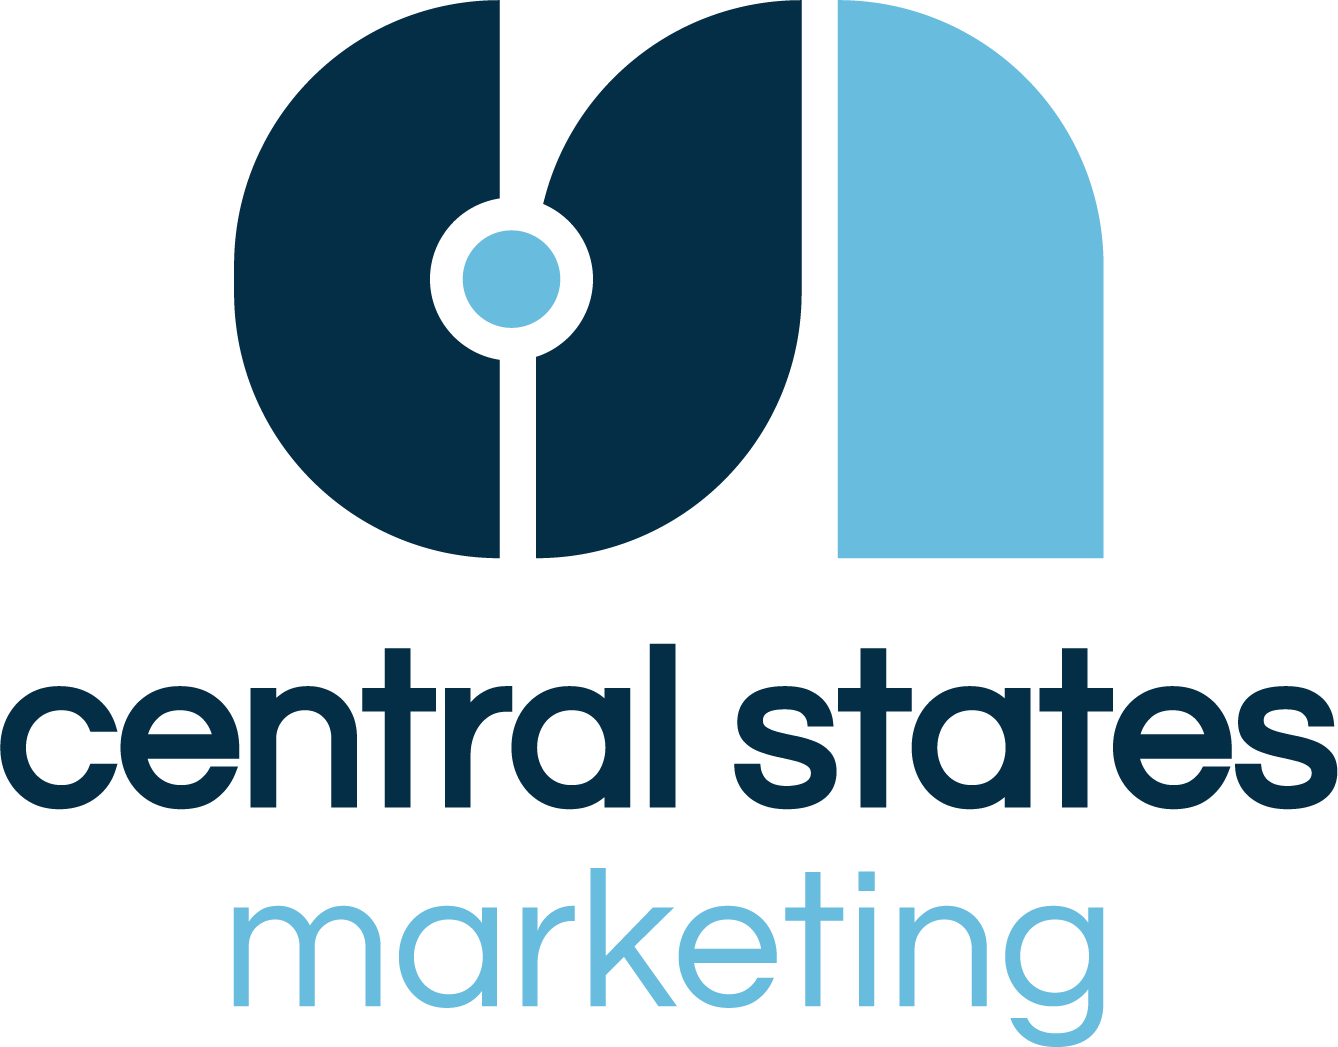 Central States Marketing